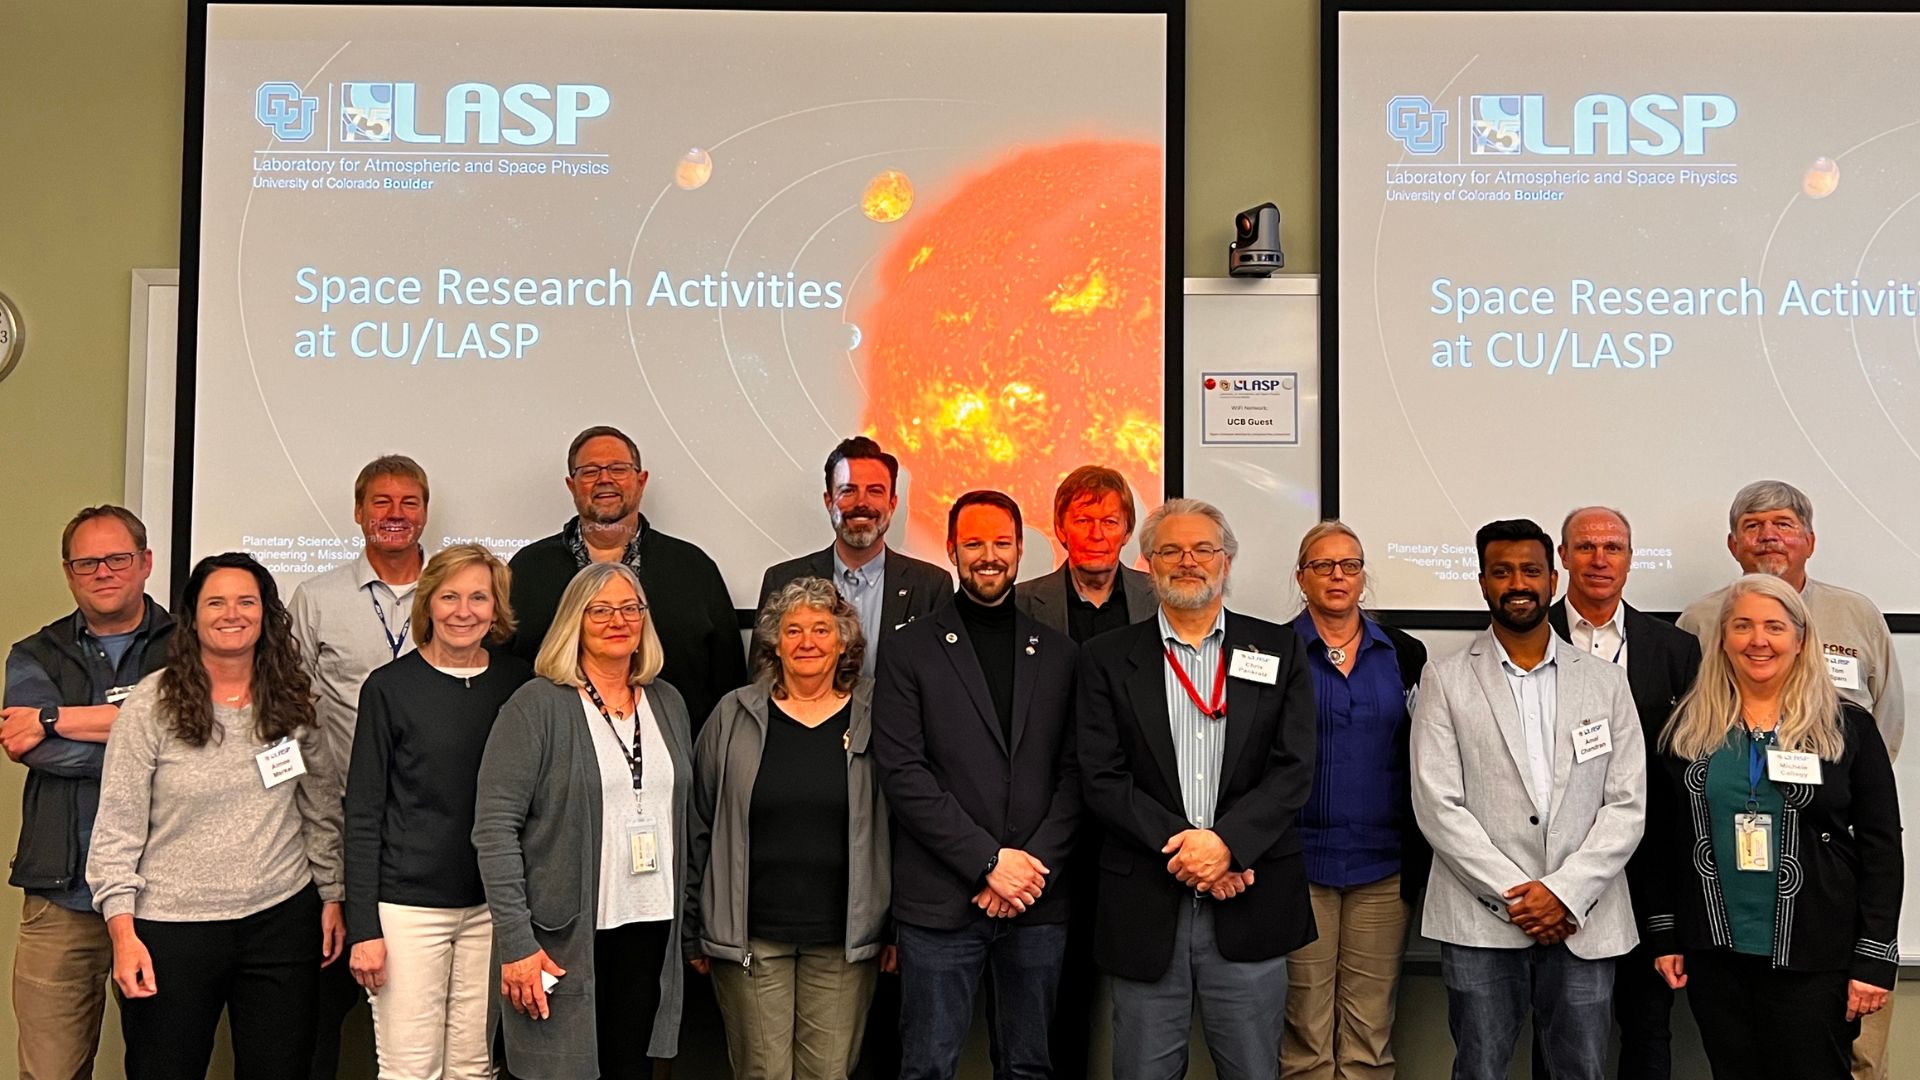 In April 2024, leaders of NASA's Heliophysics Division visited LASP, toured the facilities, and met with senior leadership, scientists and students. Credit: LASP